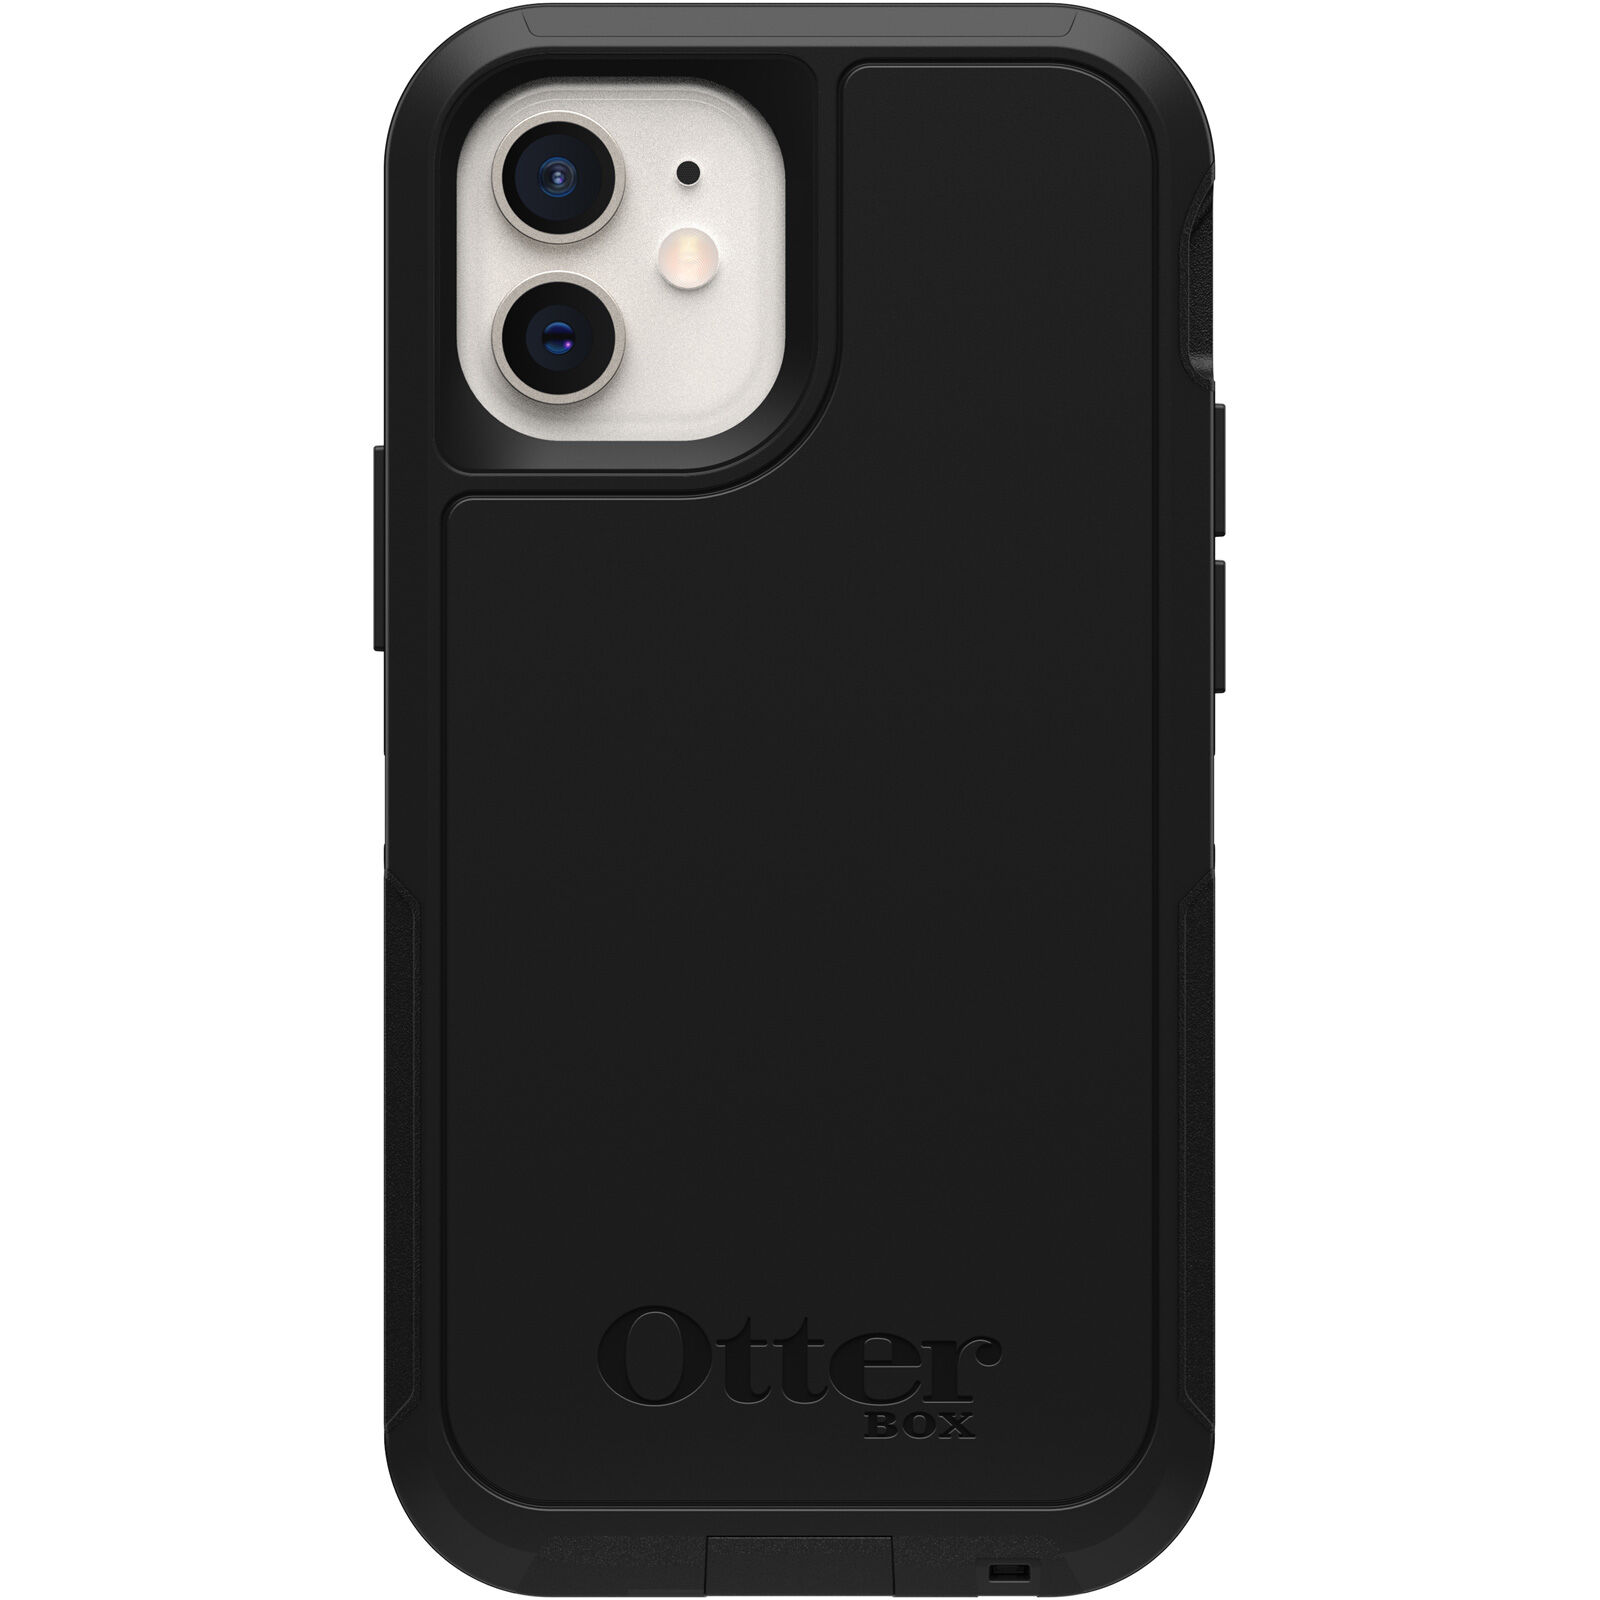 Protective iPhone 12 mini Case With Antimicrobial Defense*